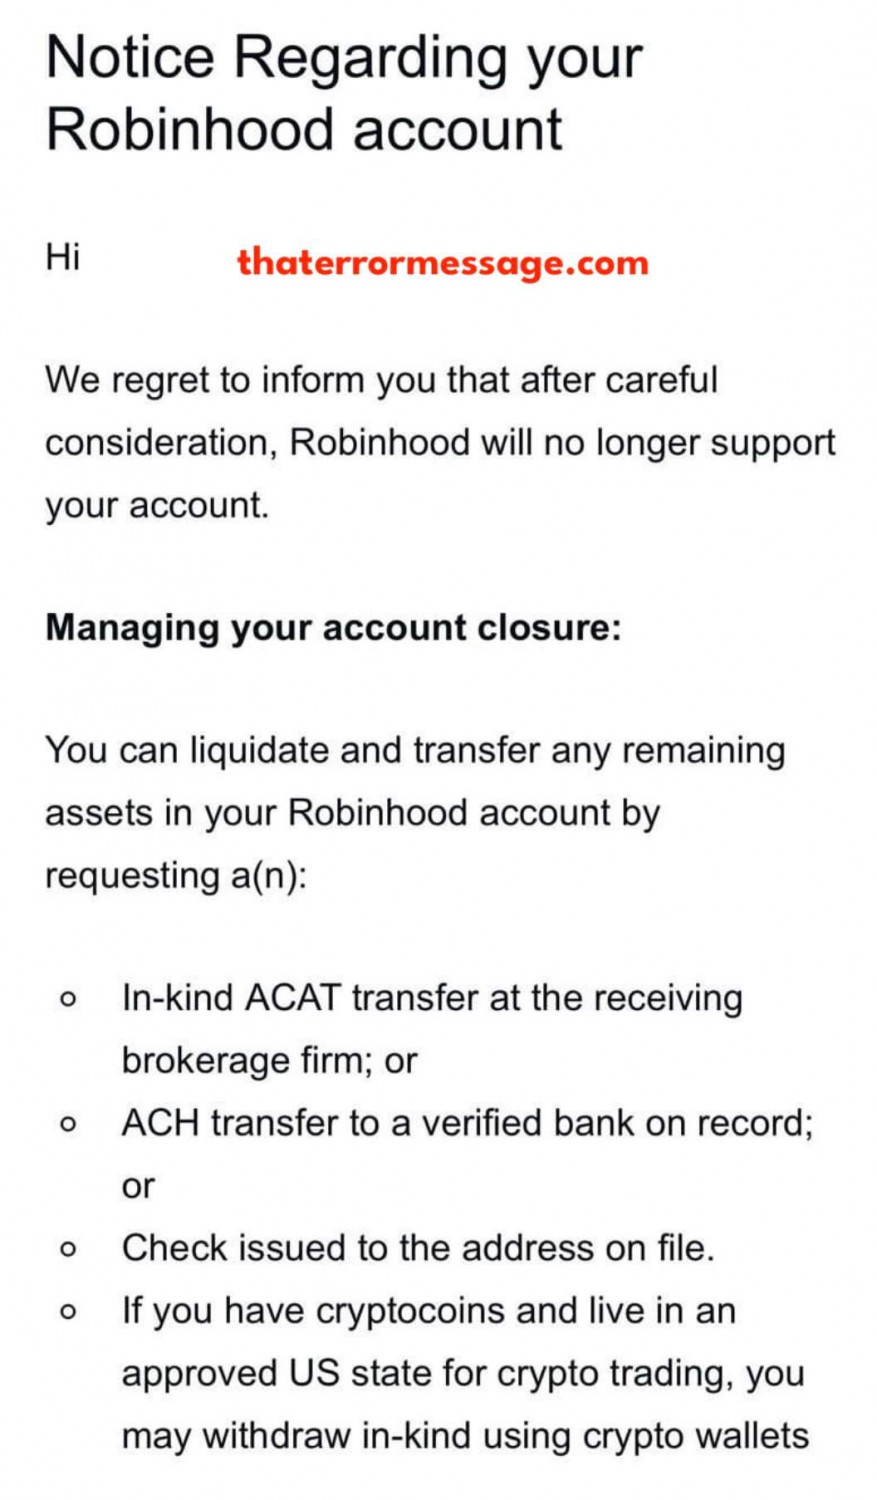 We Regret To Inform You That After Careful Consideration Robinhood Will No Longer Support Your Account